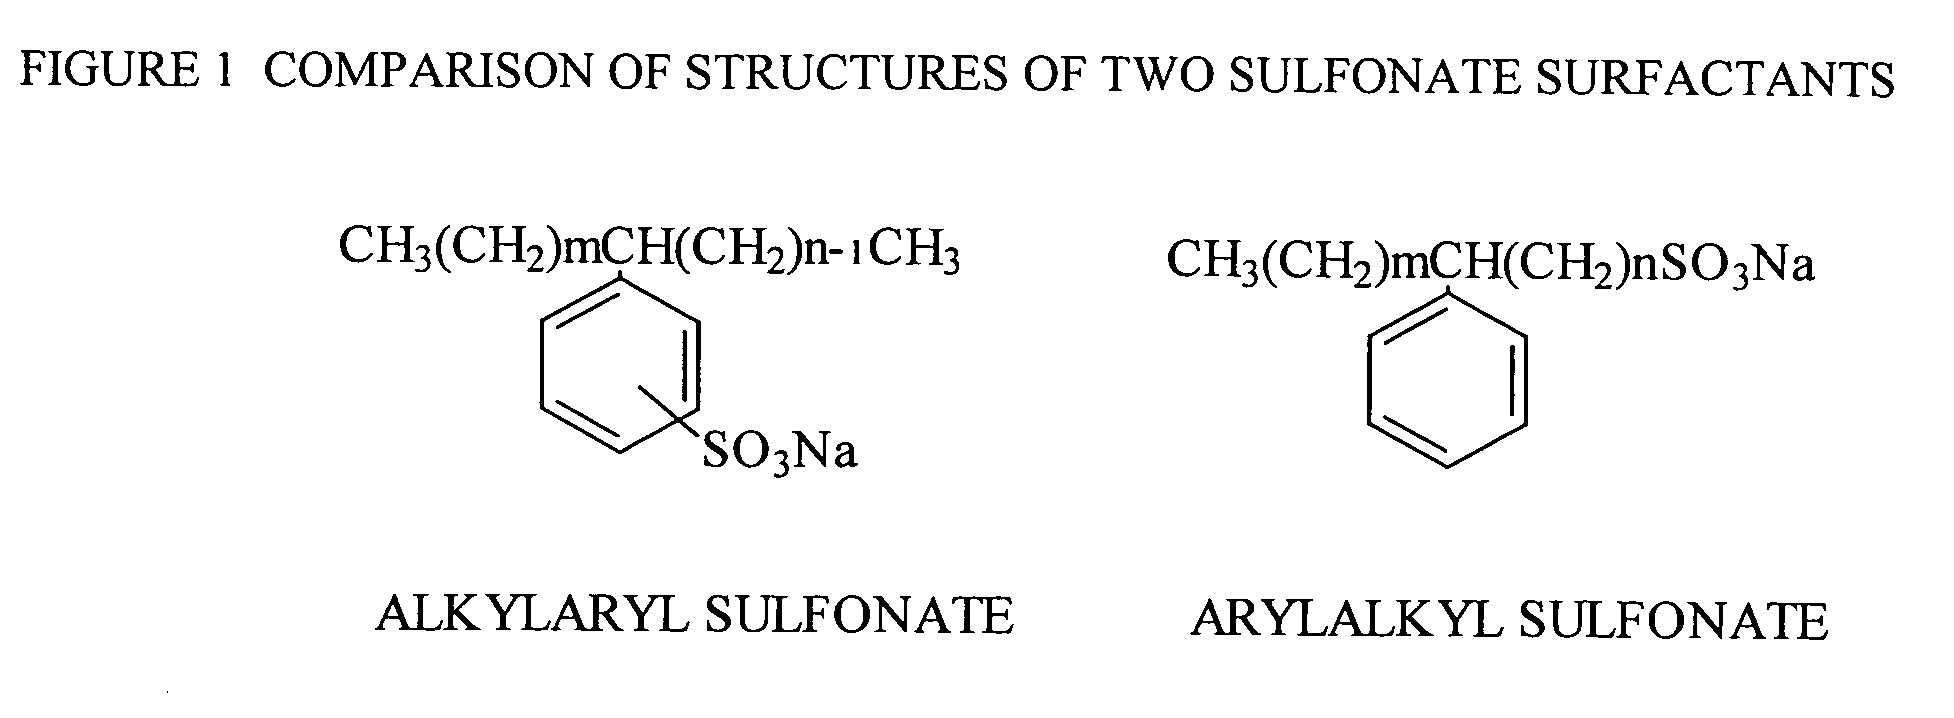 Oil recovery composition and method using arylalkyl sulfonate surfactants derived from broad distribution aplha-olefins